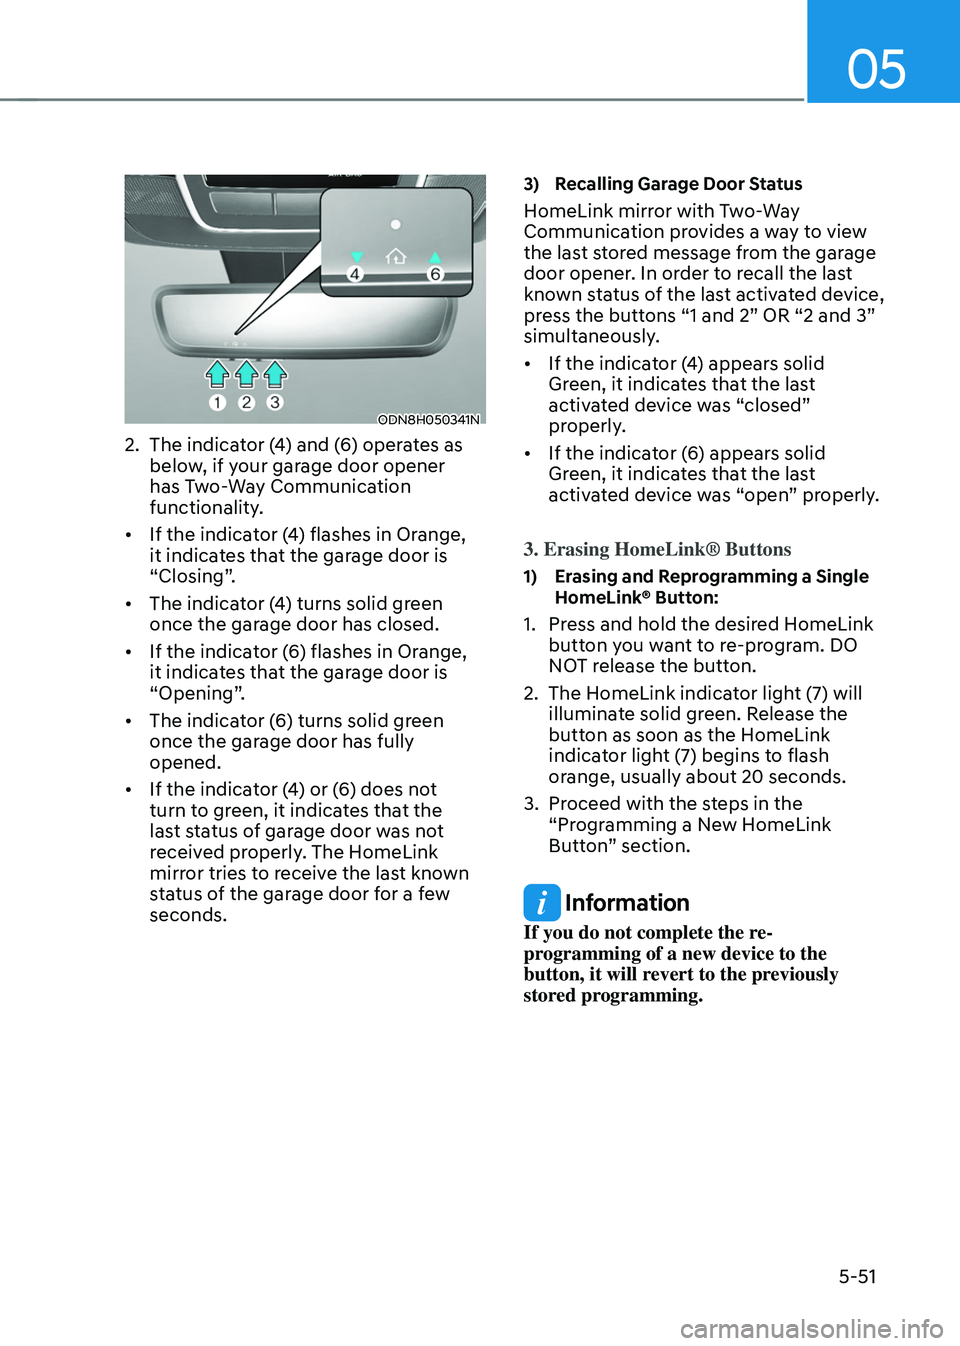 HYUNDAI TUCSON HYBRID 2022  Owners Manual 05
5-51
ODN8H050341N
2. The indicator (4) and (6) operates as 
below, if your garage door opener 
has Two-Way Communication 
functionality.
•	 If the indicator (4) flashes in Orange, 
it indicates t